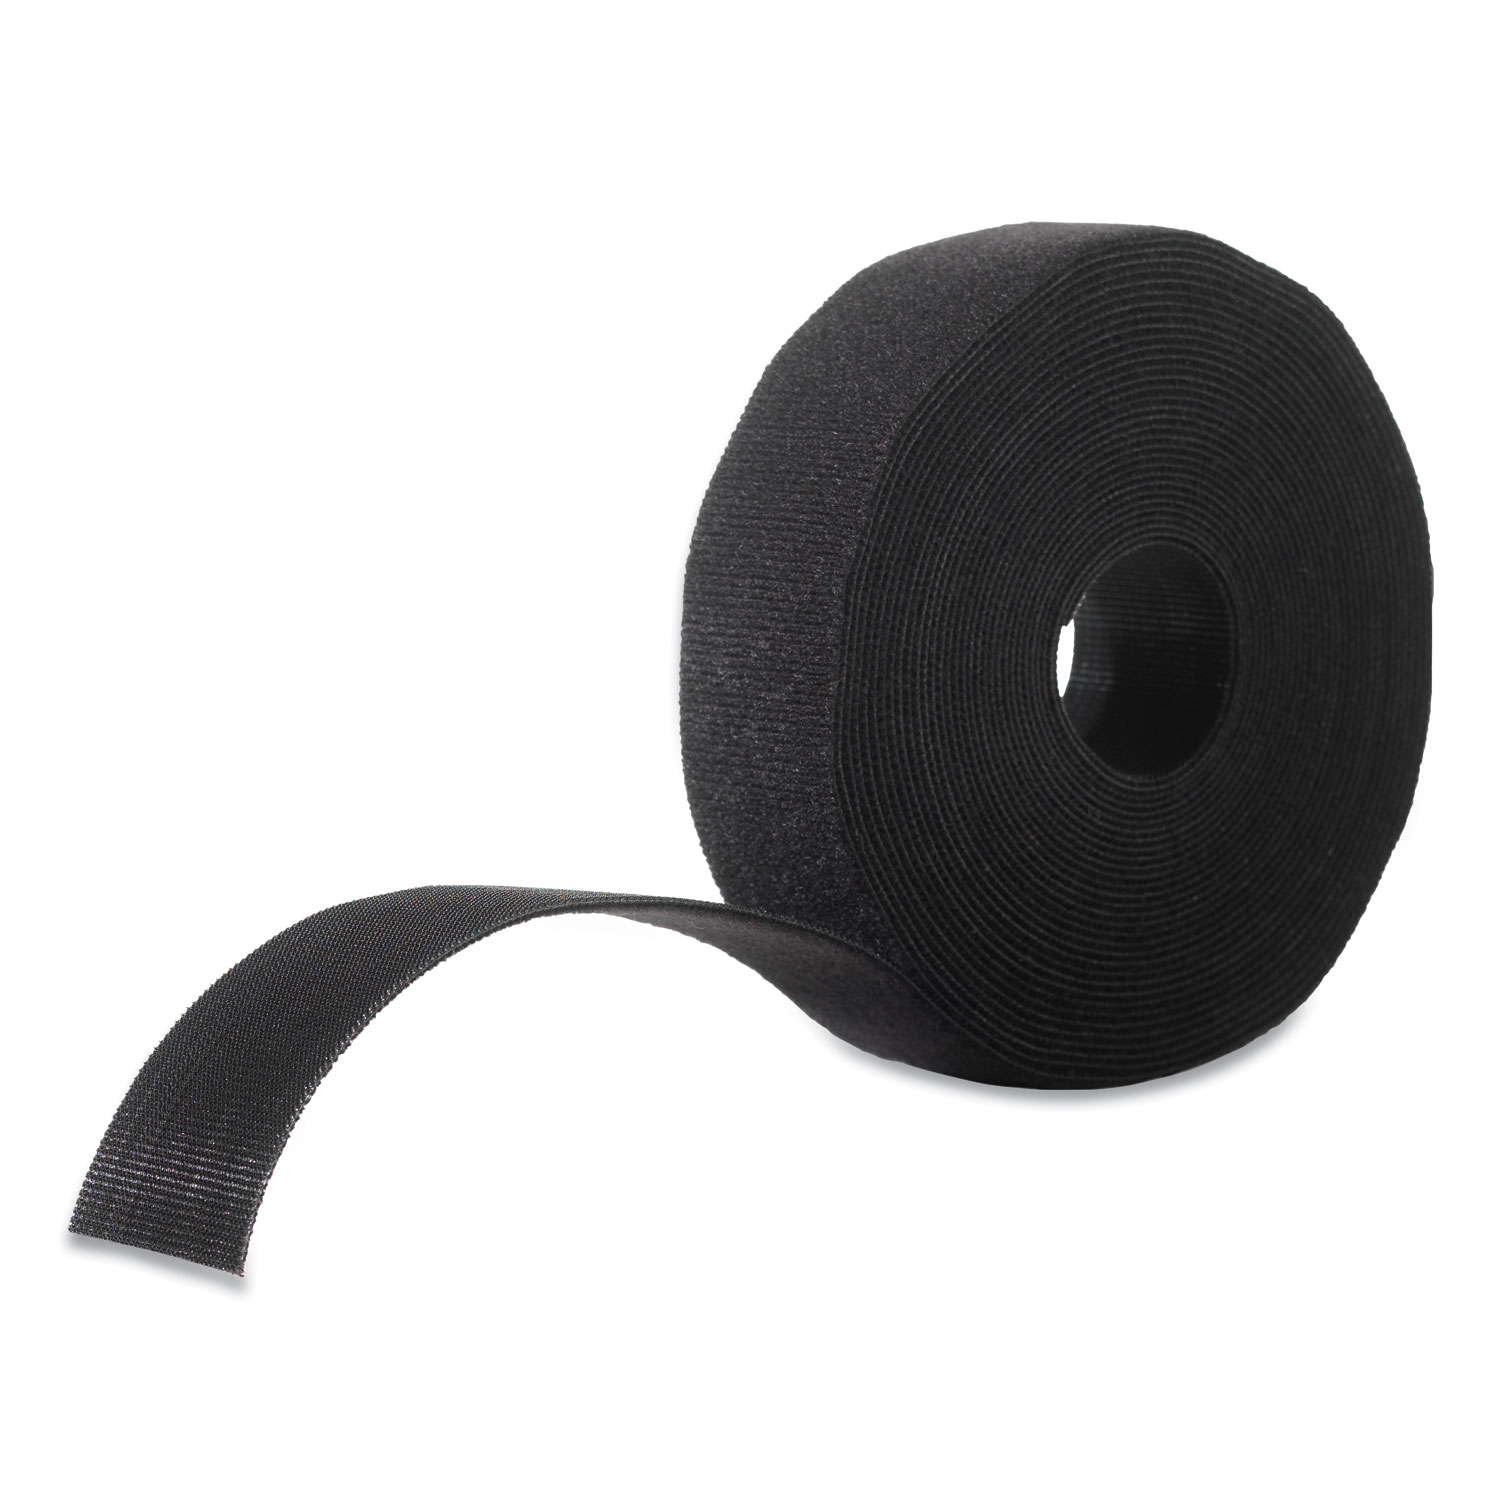 ONE-WRAP Ties and Straps by VELCRO® Brand VEK30200